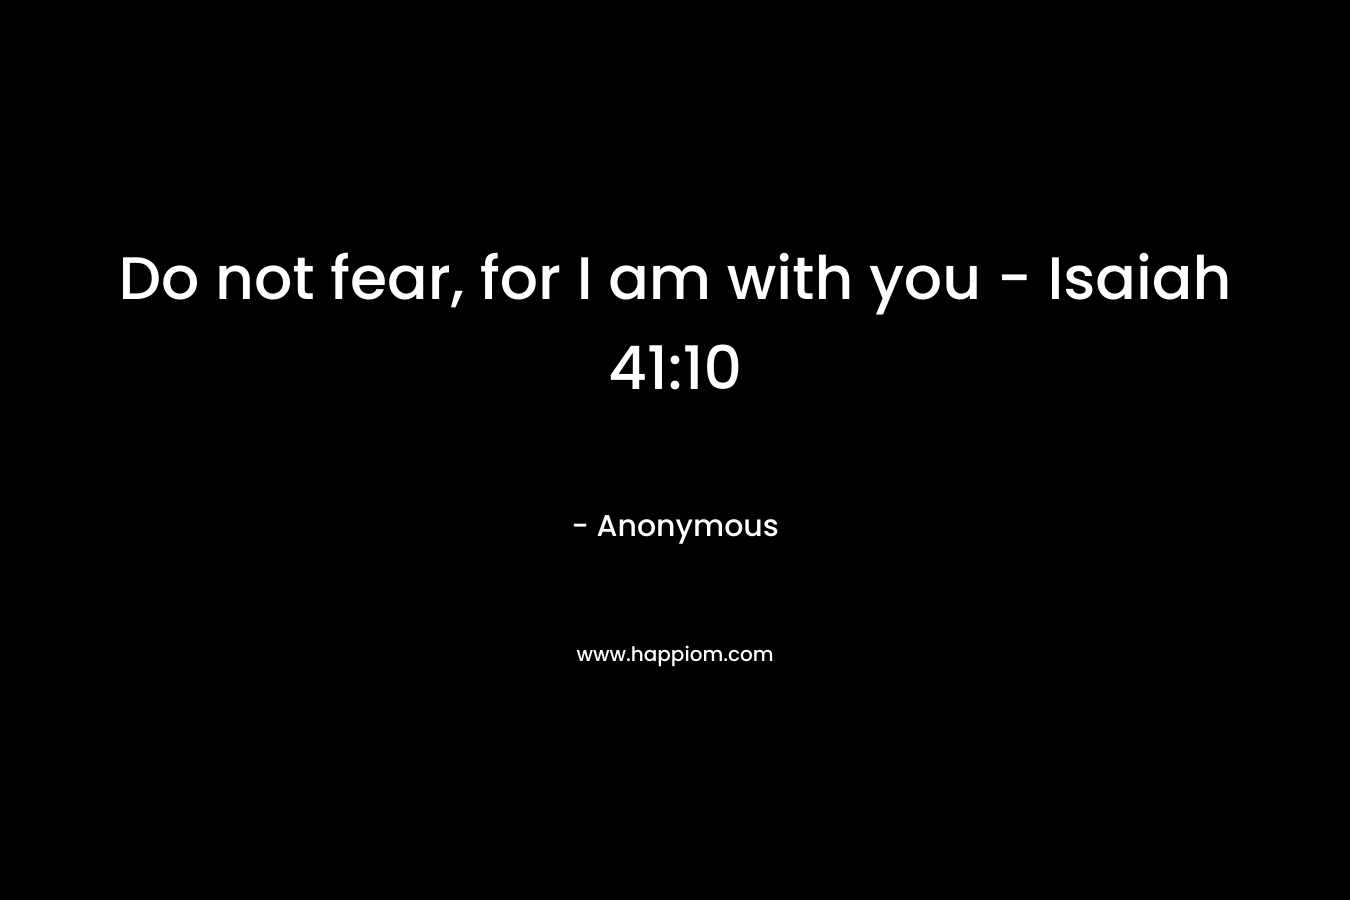 Do not fear, for I am with you - Isaiah 41:10